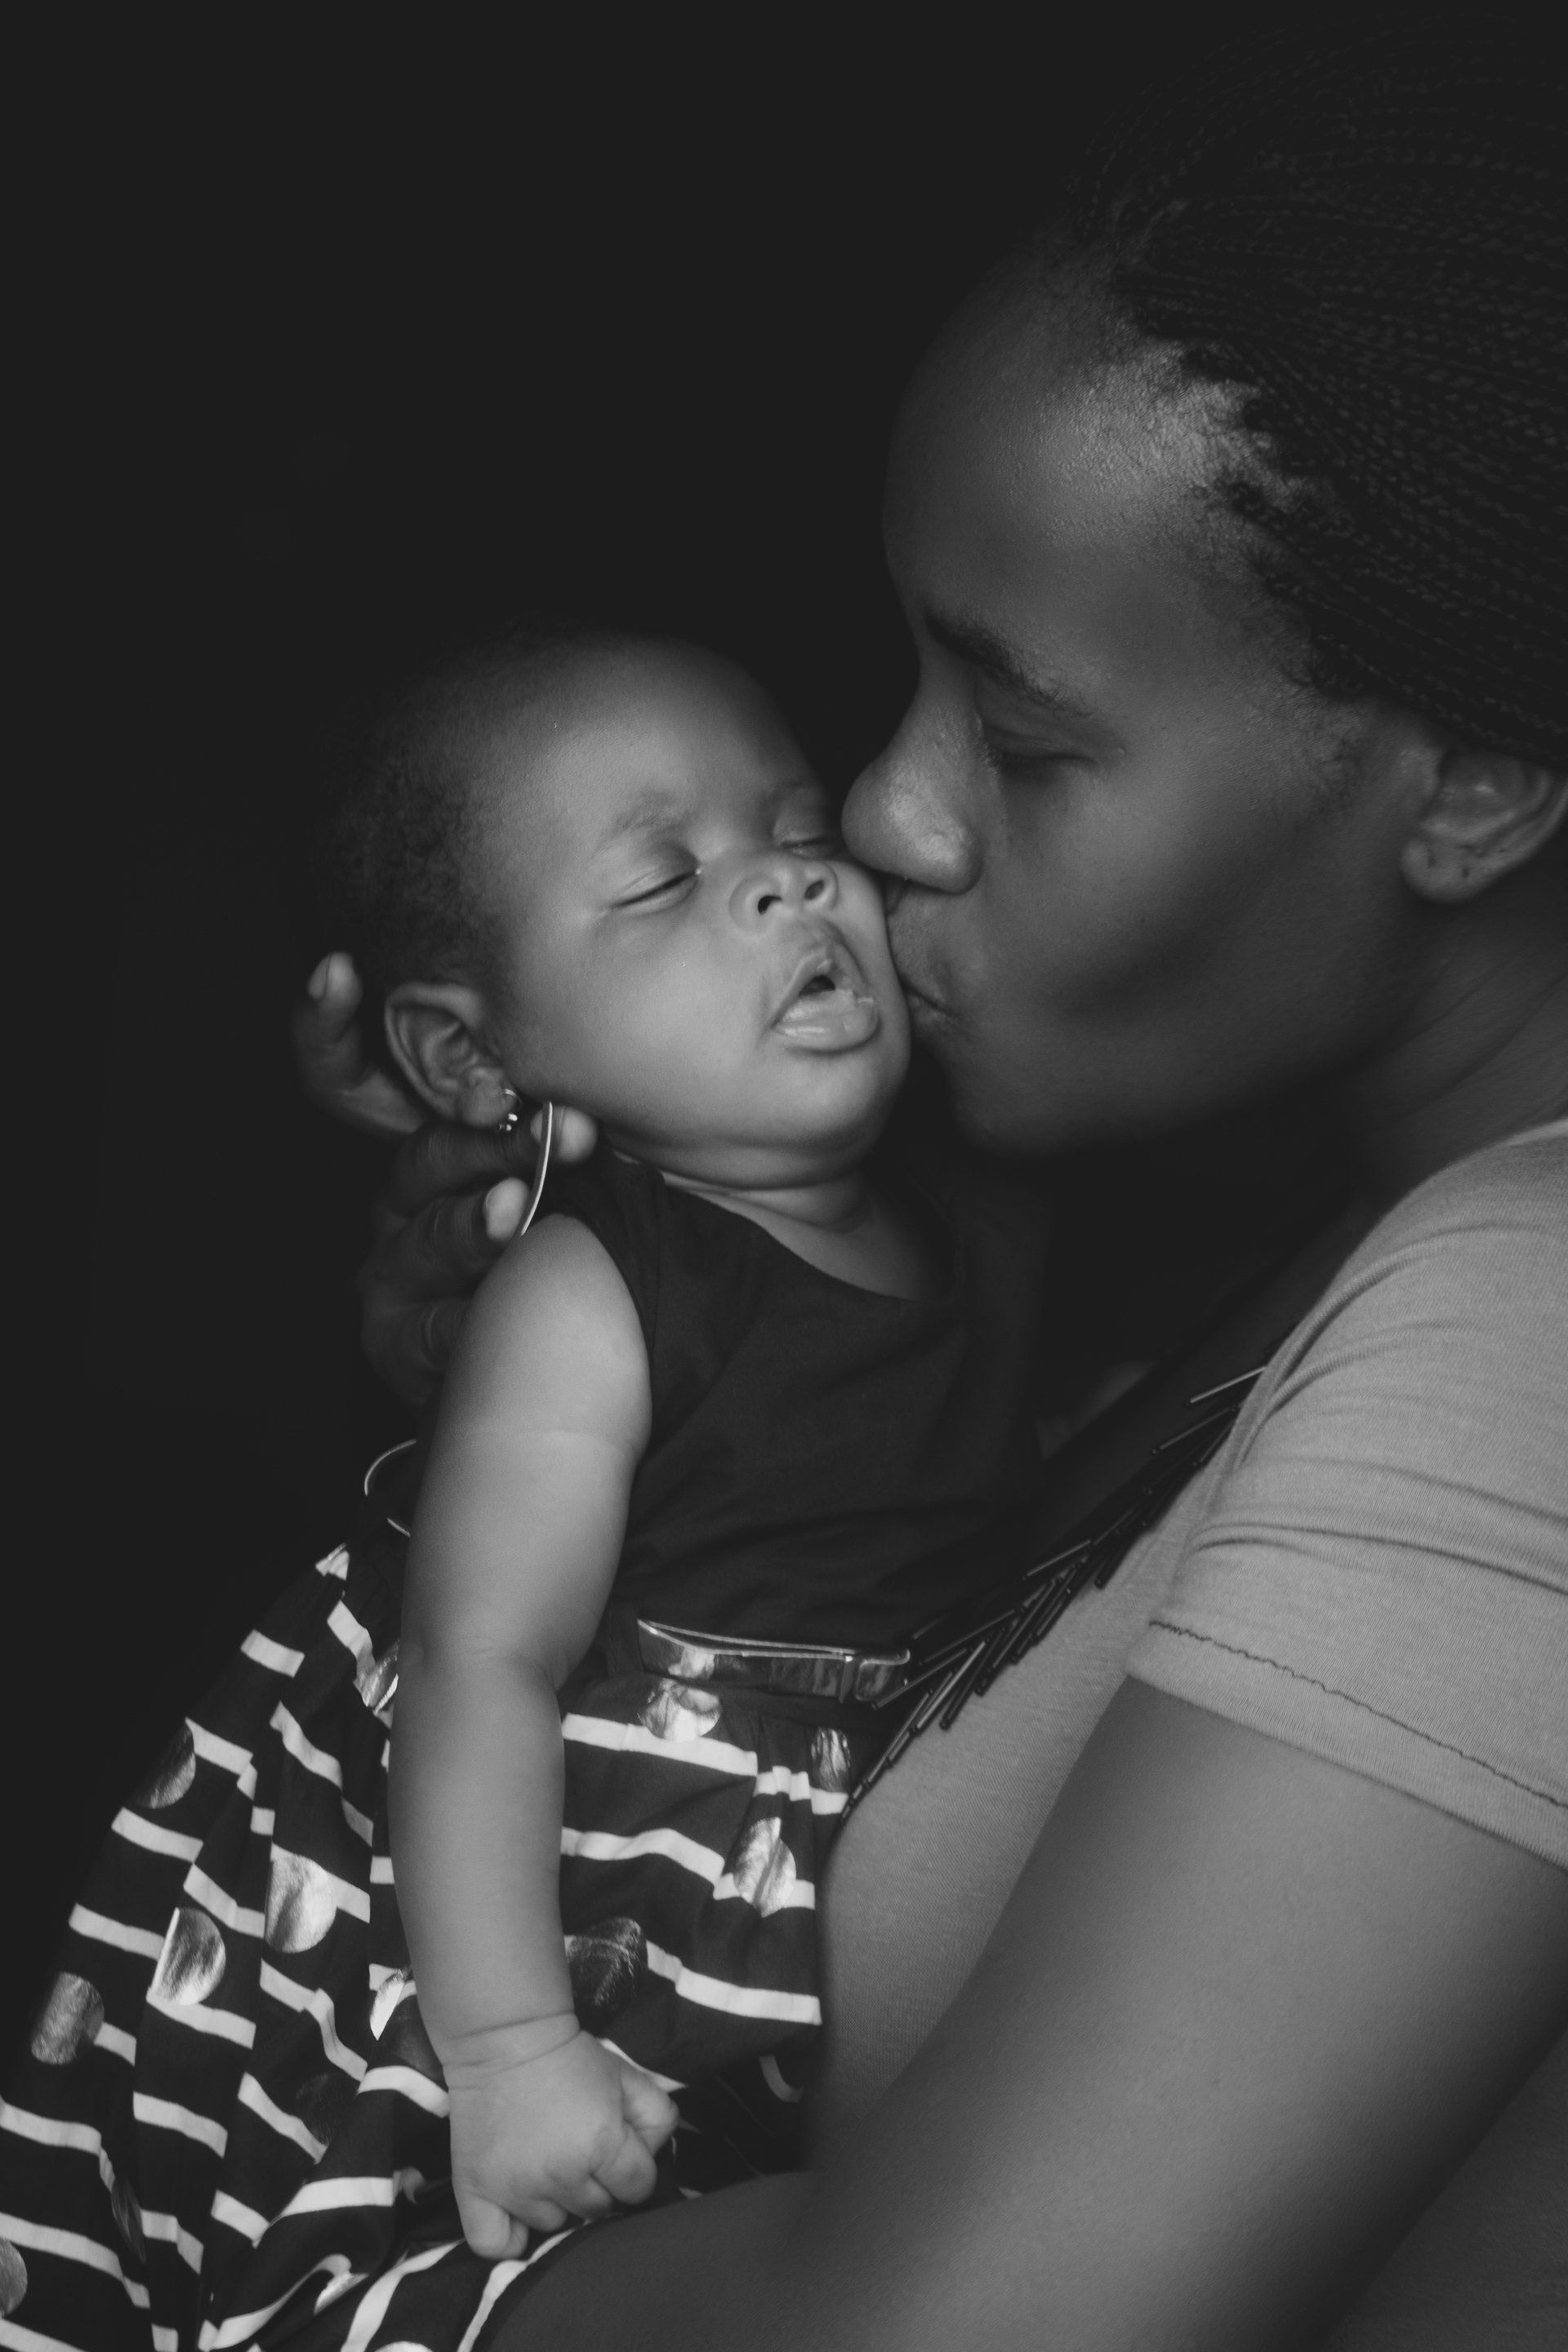 A woman is kissing her baby on the cheek in a black and white photo.